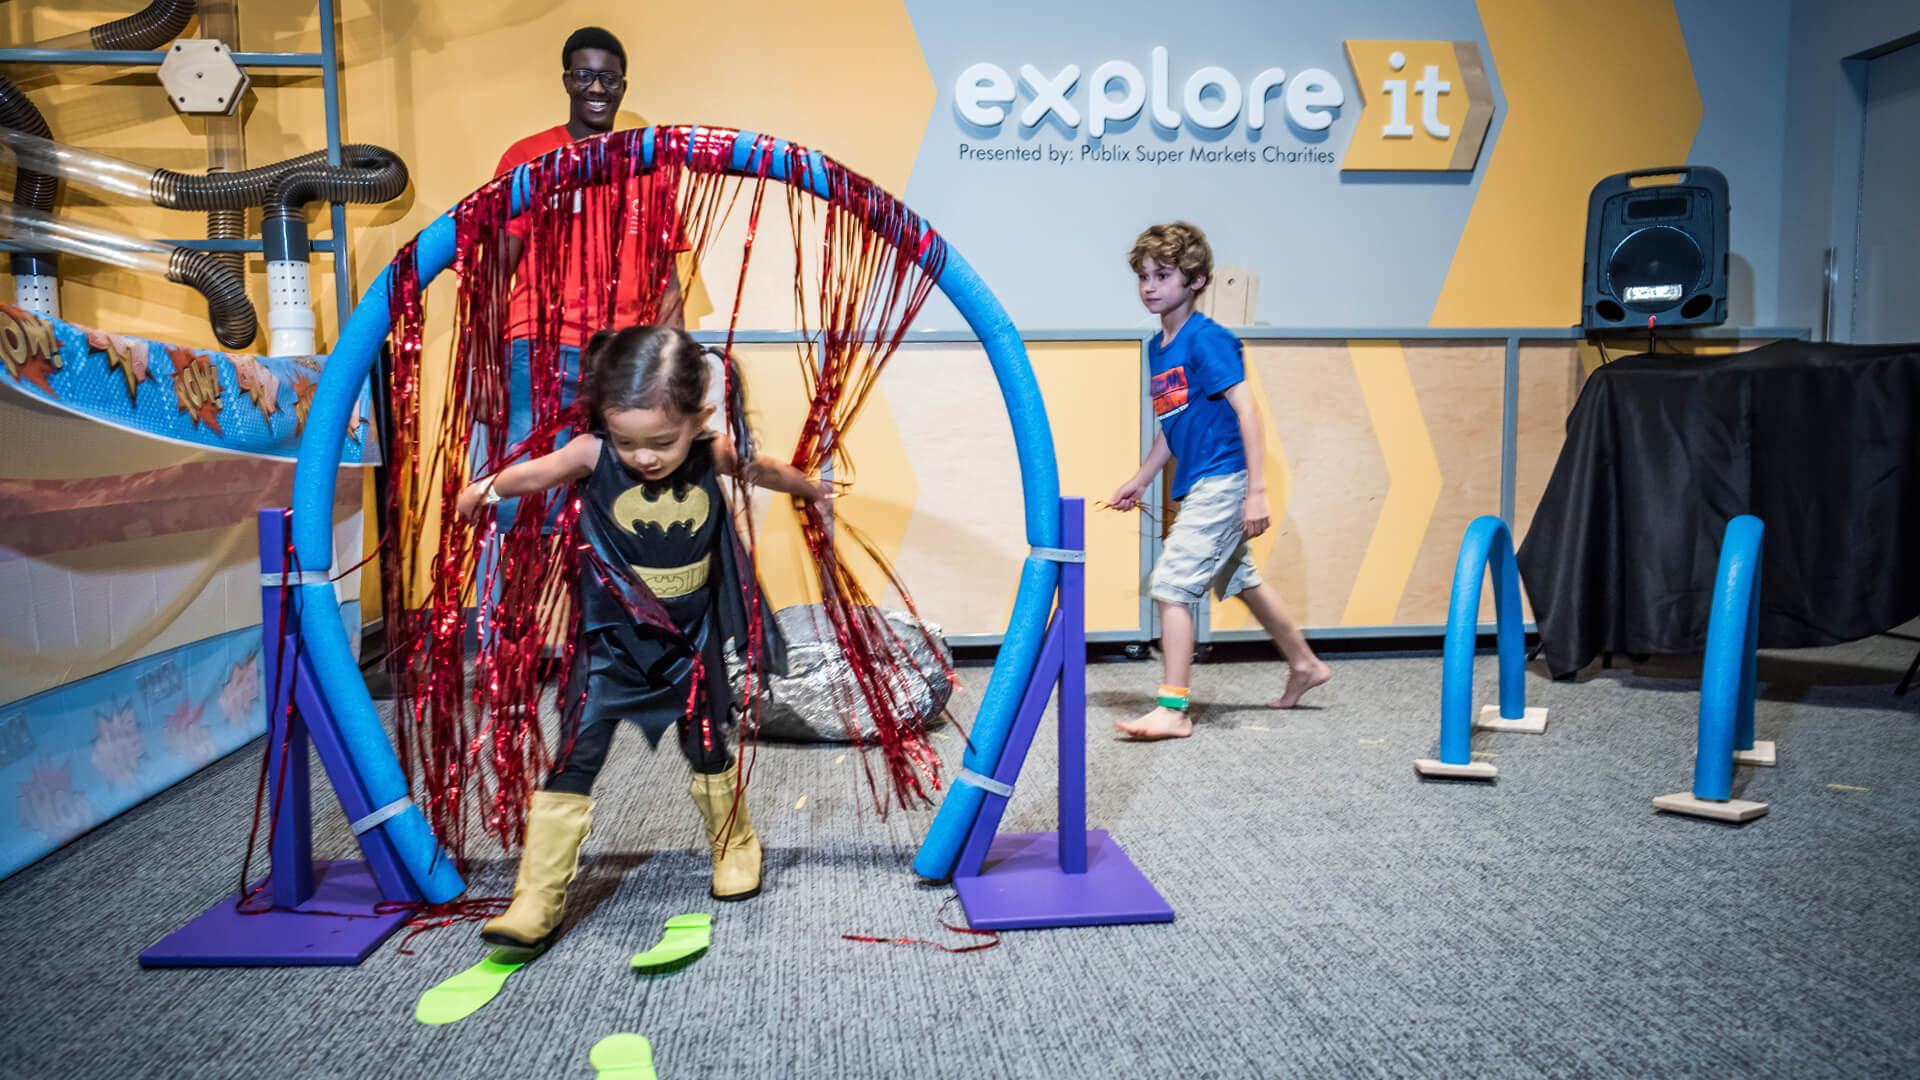 Child in Batgirl costume navigating obstacle course at Science Center